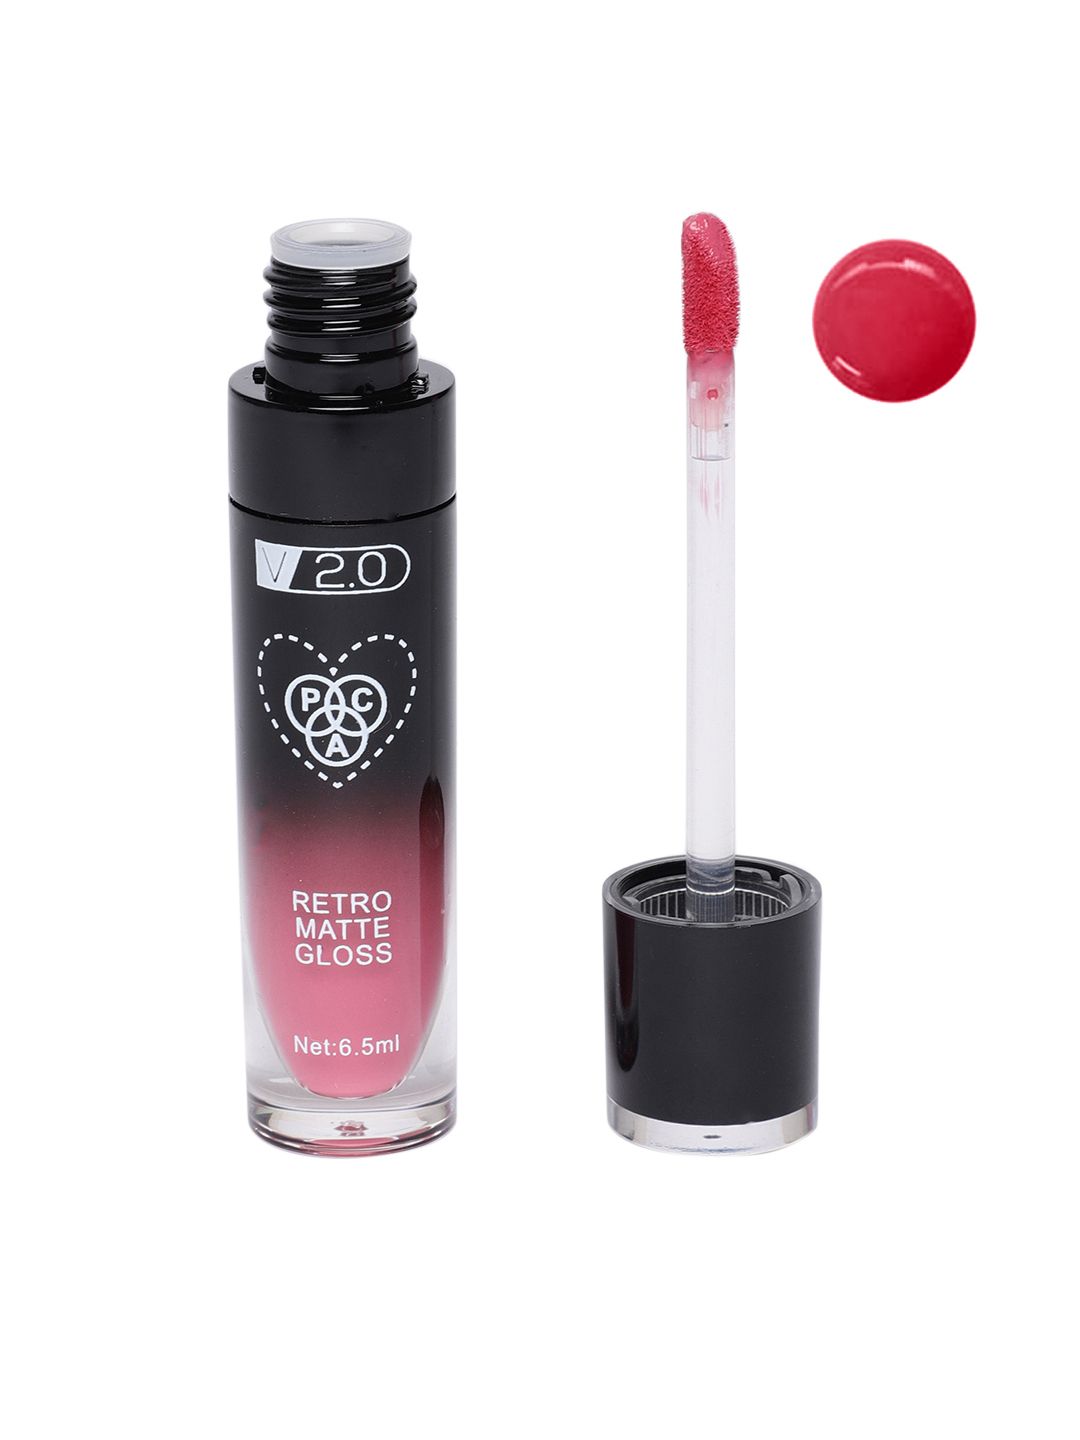 PAC 02 Candy Heart Retro Matte Gloss 6.5 ml Price in India